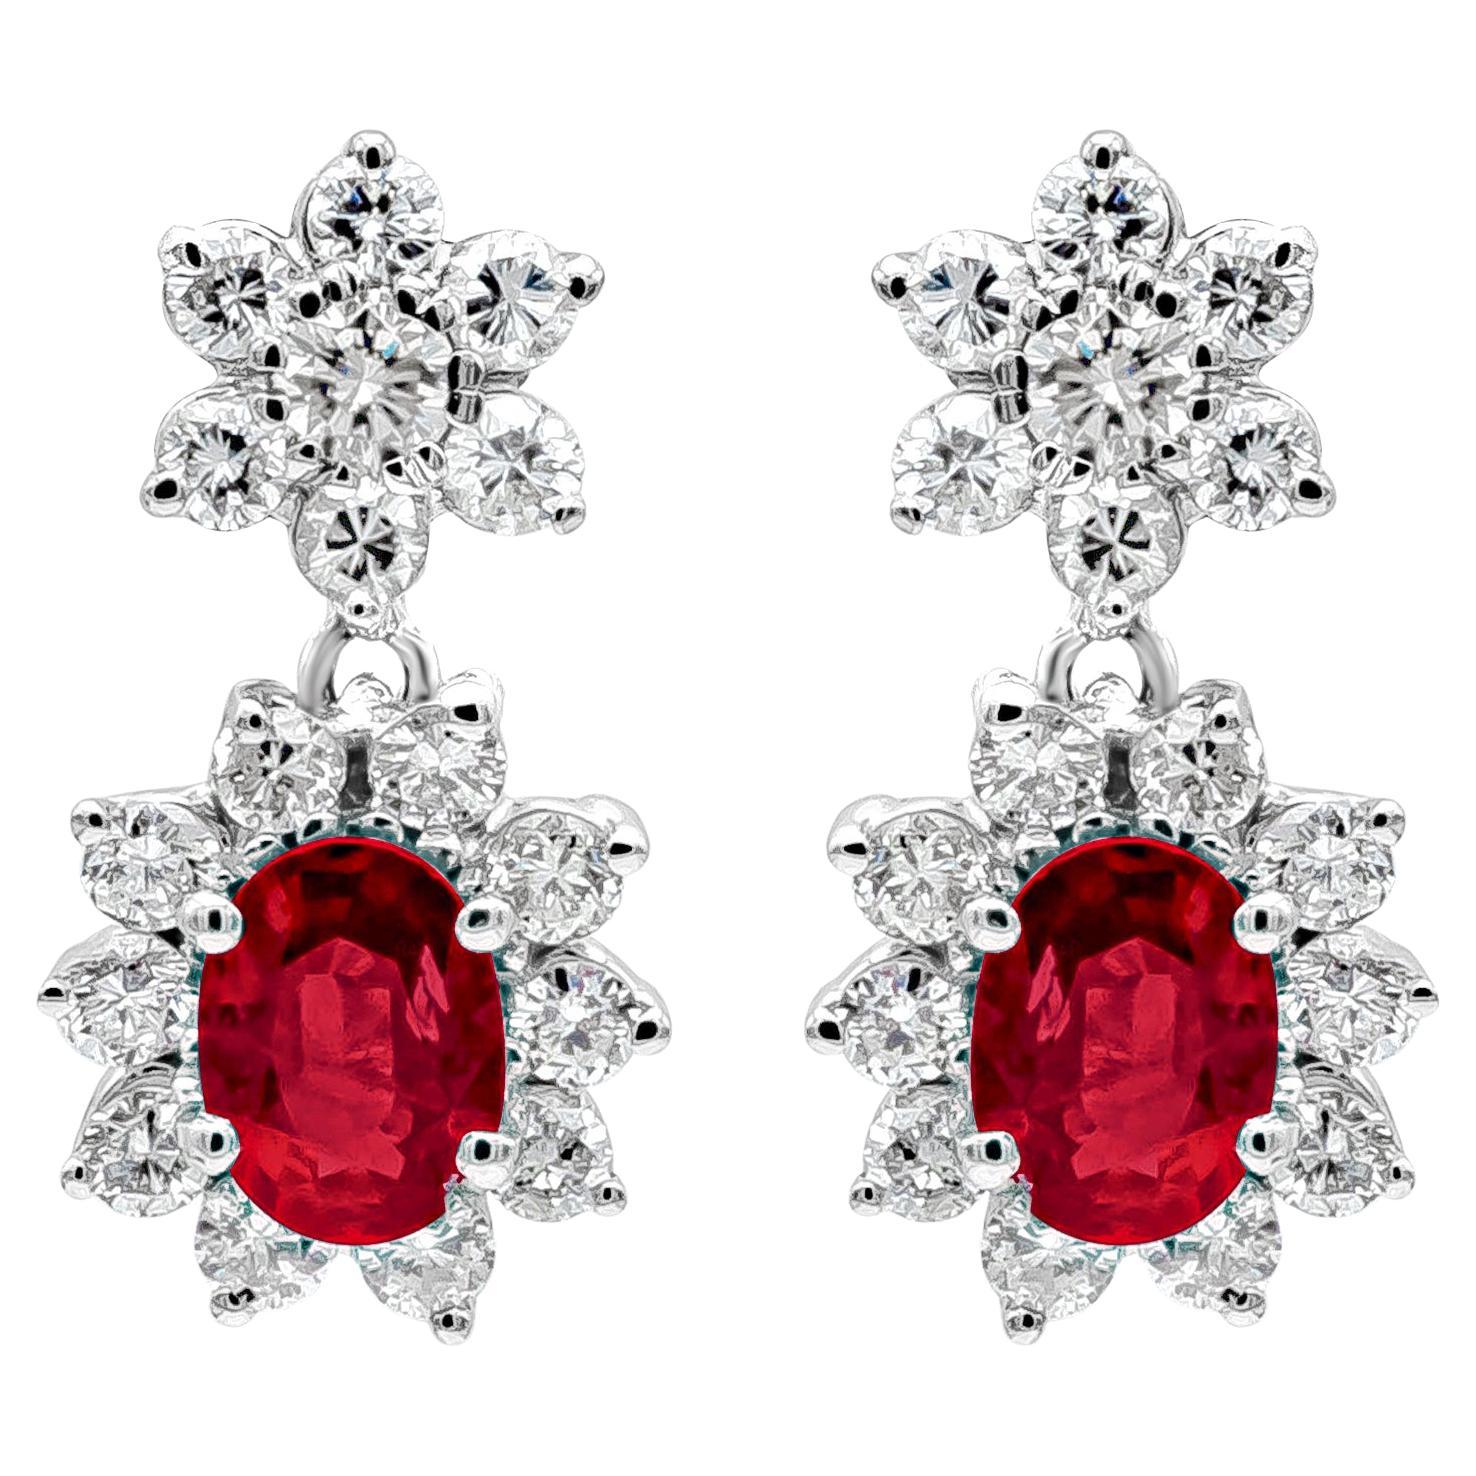 Roman Malakov 3.44 Carats Total Oval Cut Ruby and Round Diamond Drop Earrings For Sale